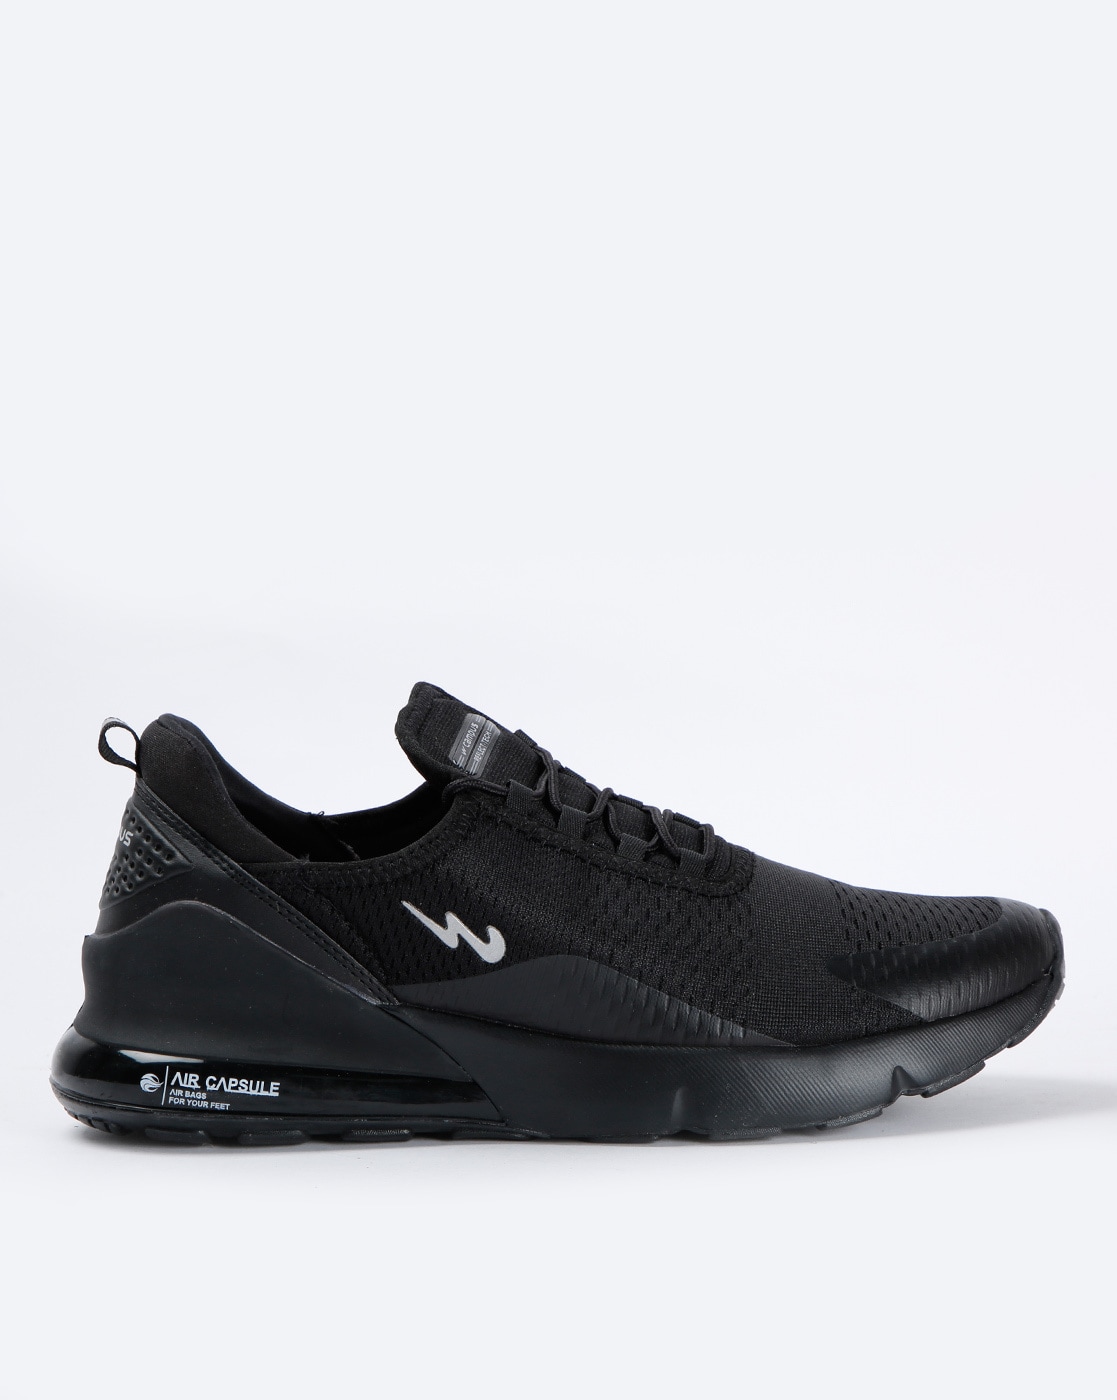 Black Sports Shoes - Buy Black Sports Shoes Online in India